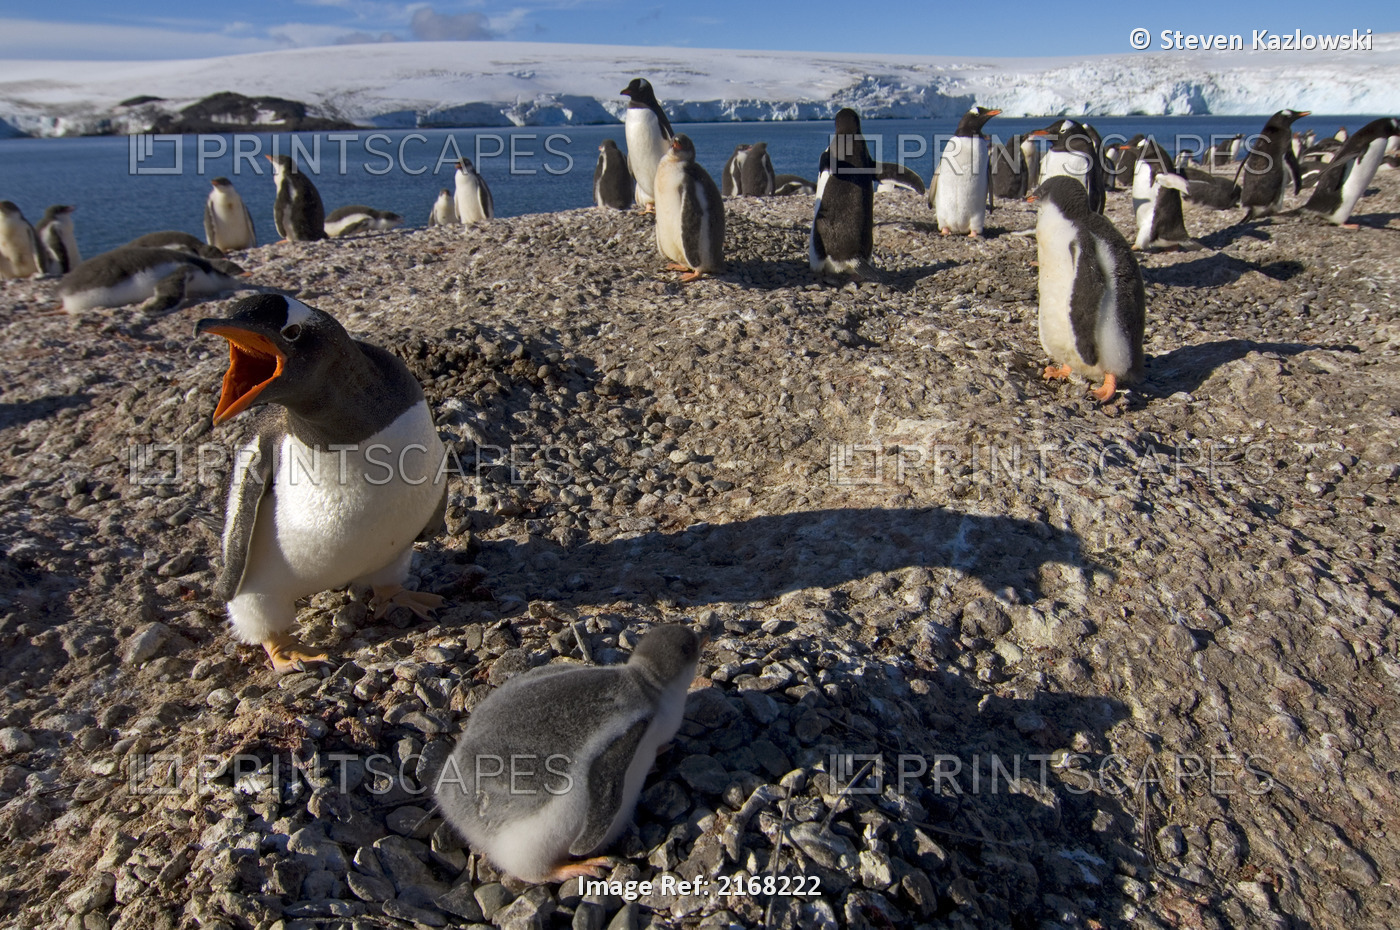 Gentoo Penguin With Chick On Nest On South Shetland Islands Antarctica In The ...